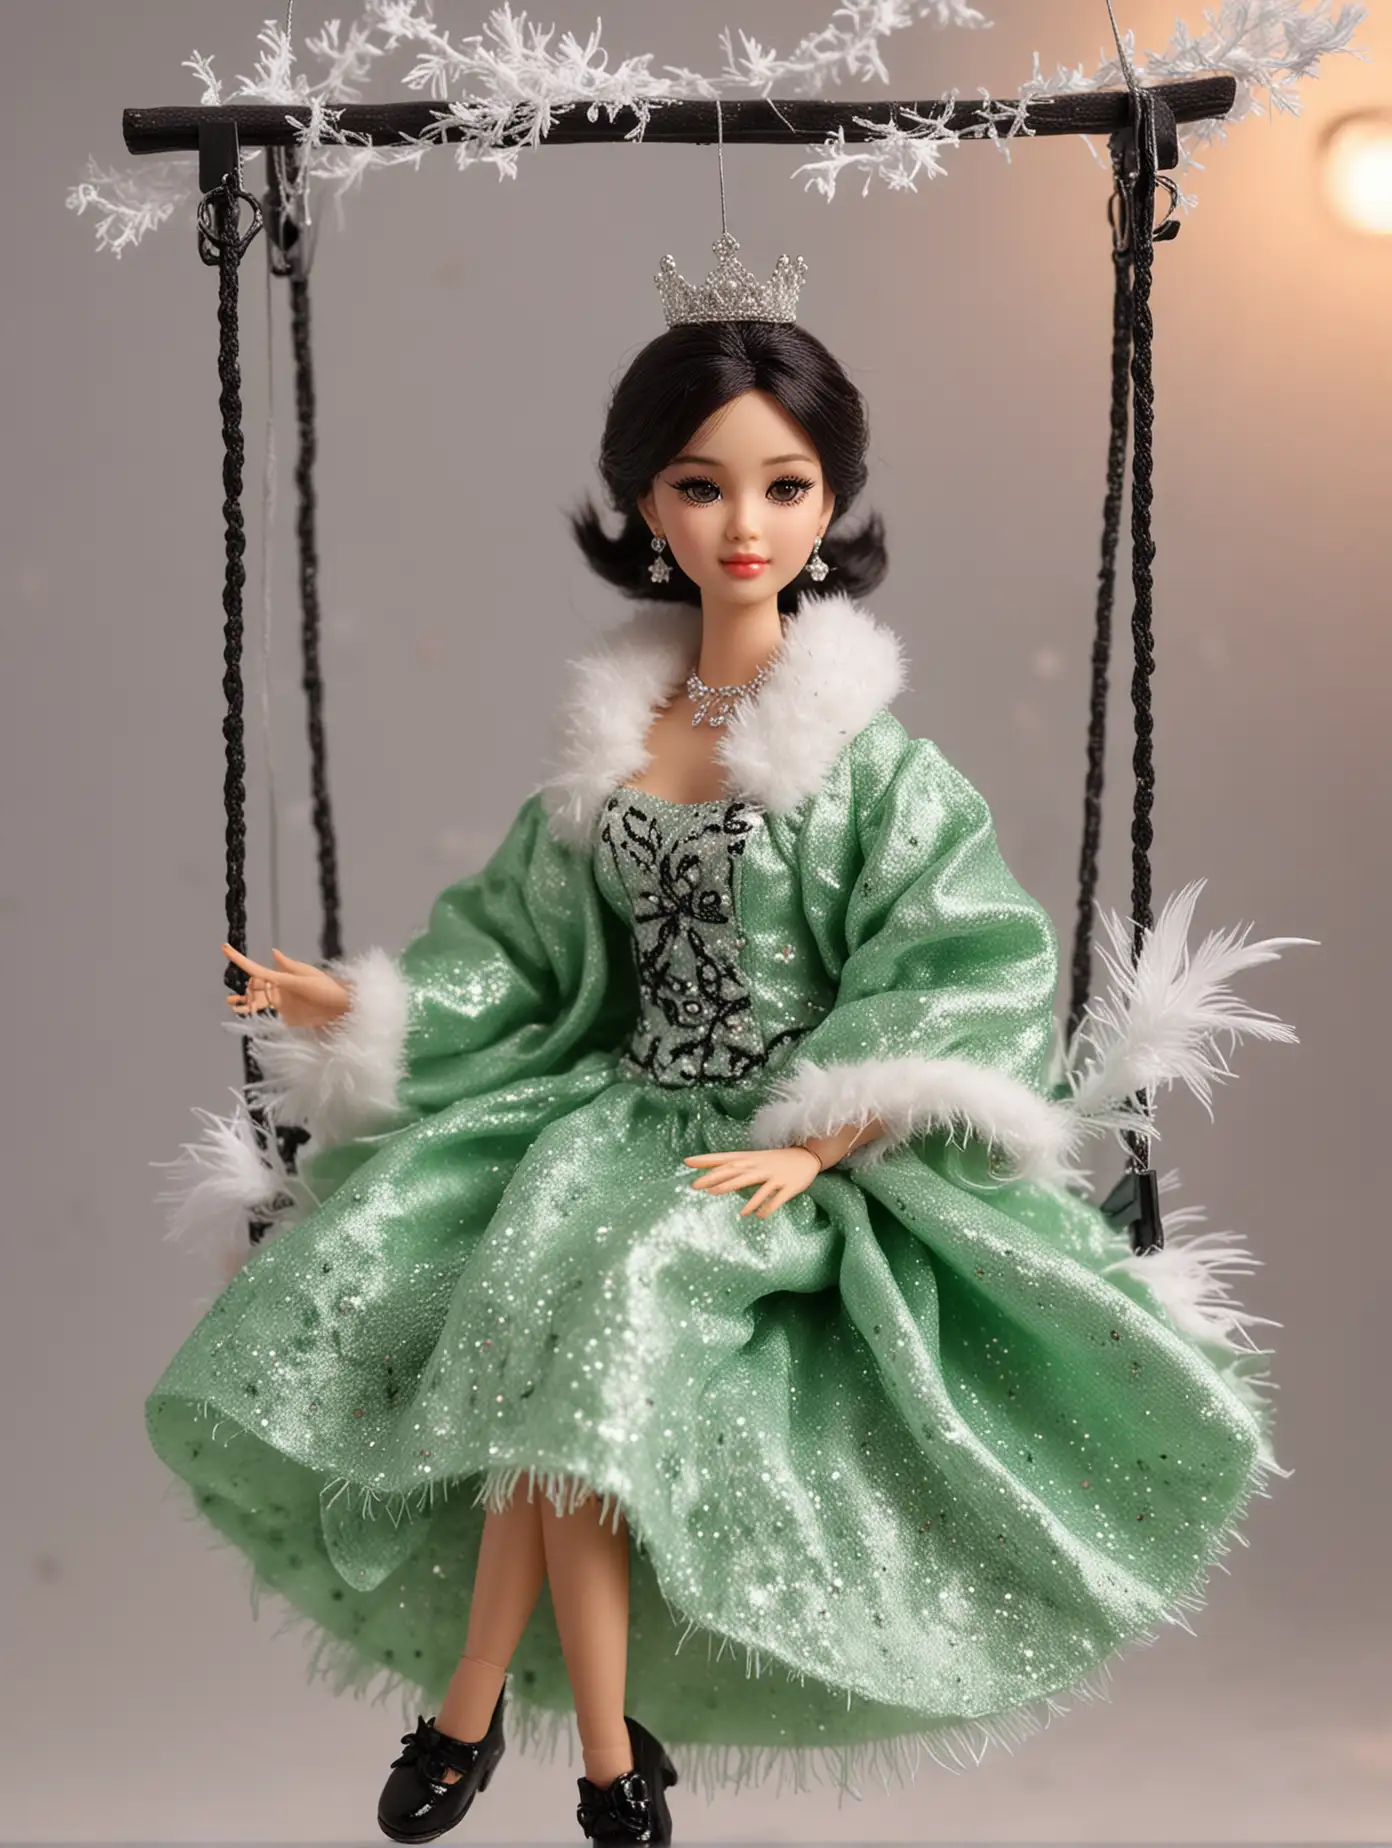 Beautiful teenage Kim Hye-yoon barbie doll. Height 5CM. wearing a flaming Glitter Snow Green Dress. Crown. shawl. Cute Pose Style. black shoes. sitting on a miniature feather swing